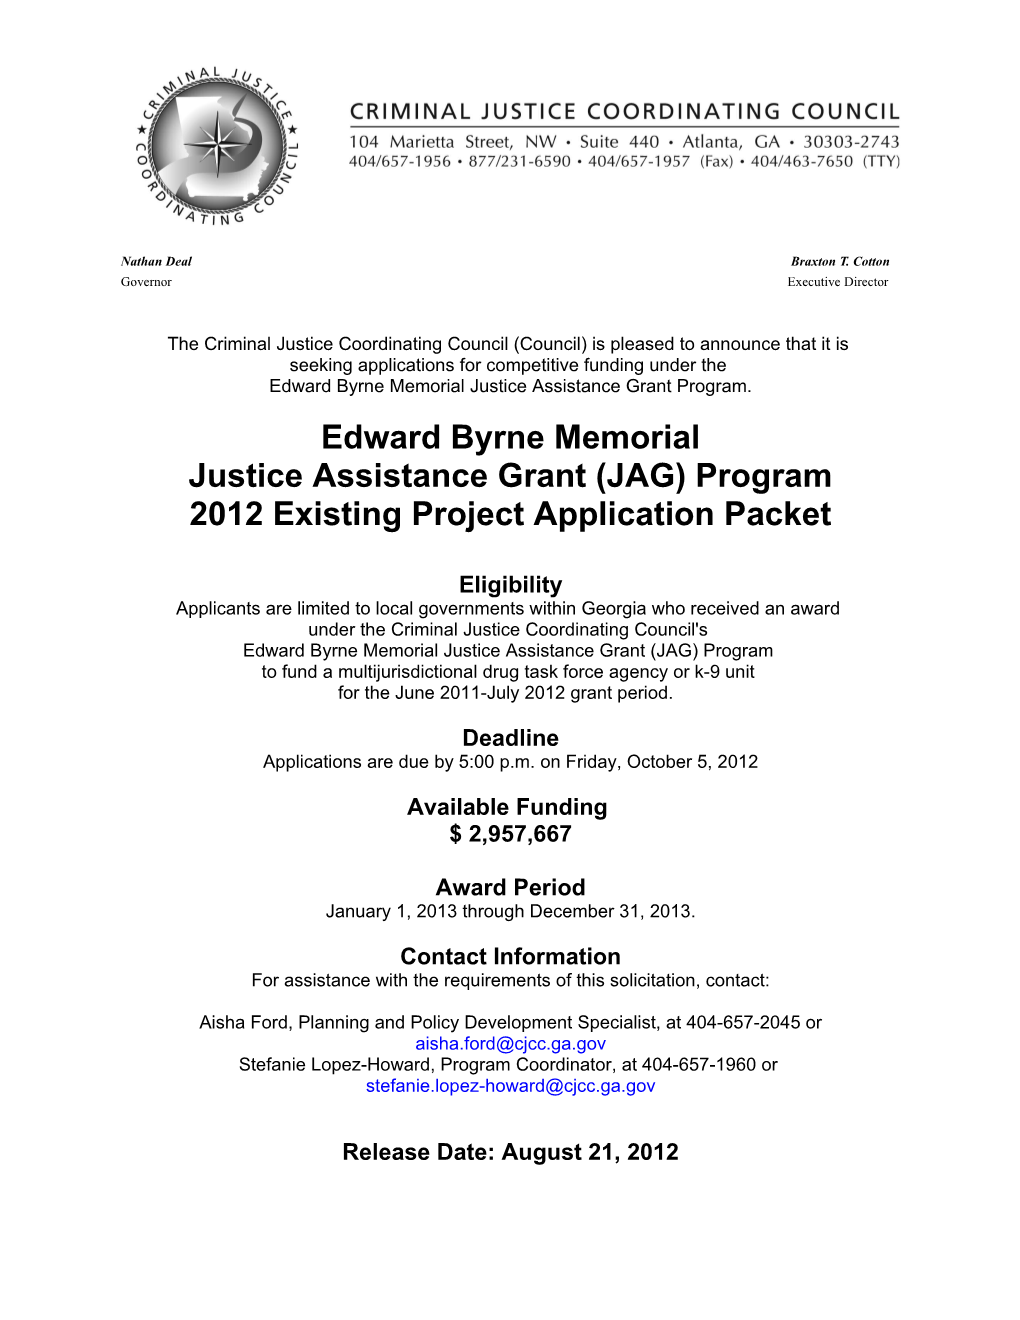 The Criminal Justice Coordinating Council (Council) Is Pleased to Announce That It Is